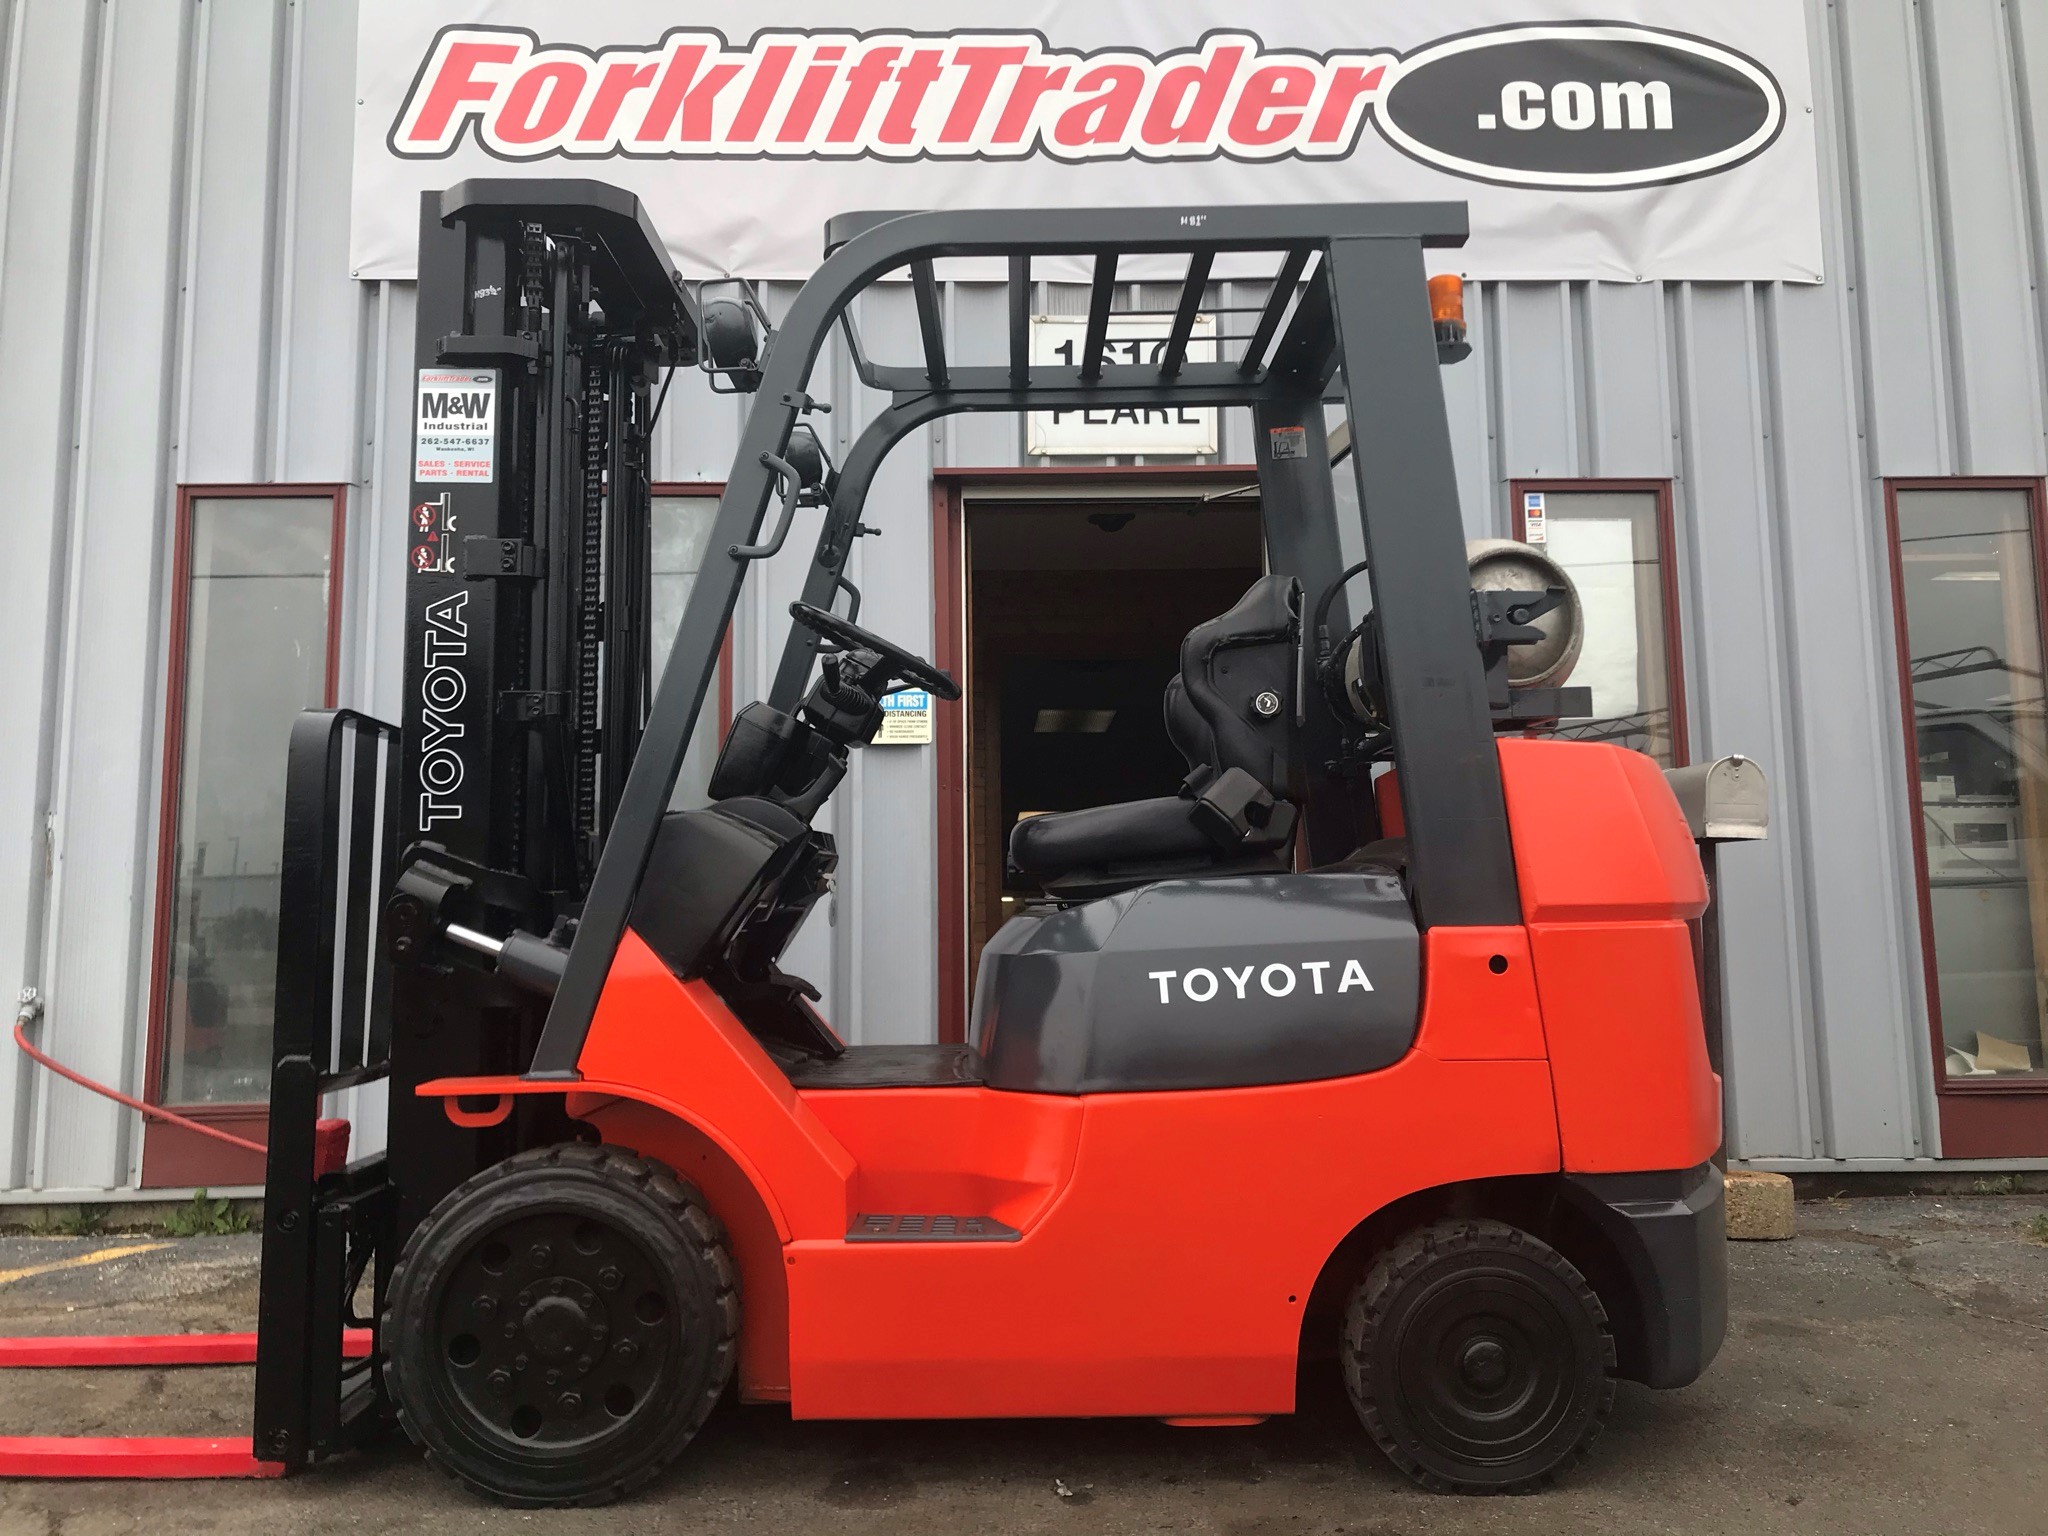 189" lift height 2007 toyota forklift for sale